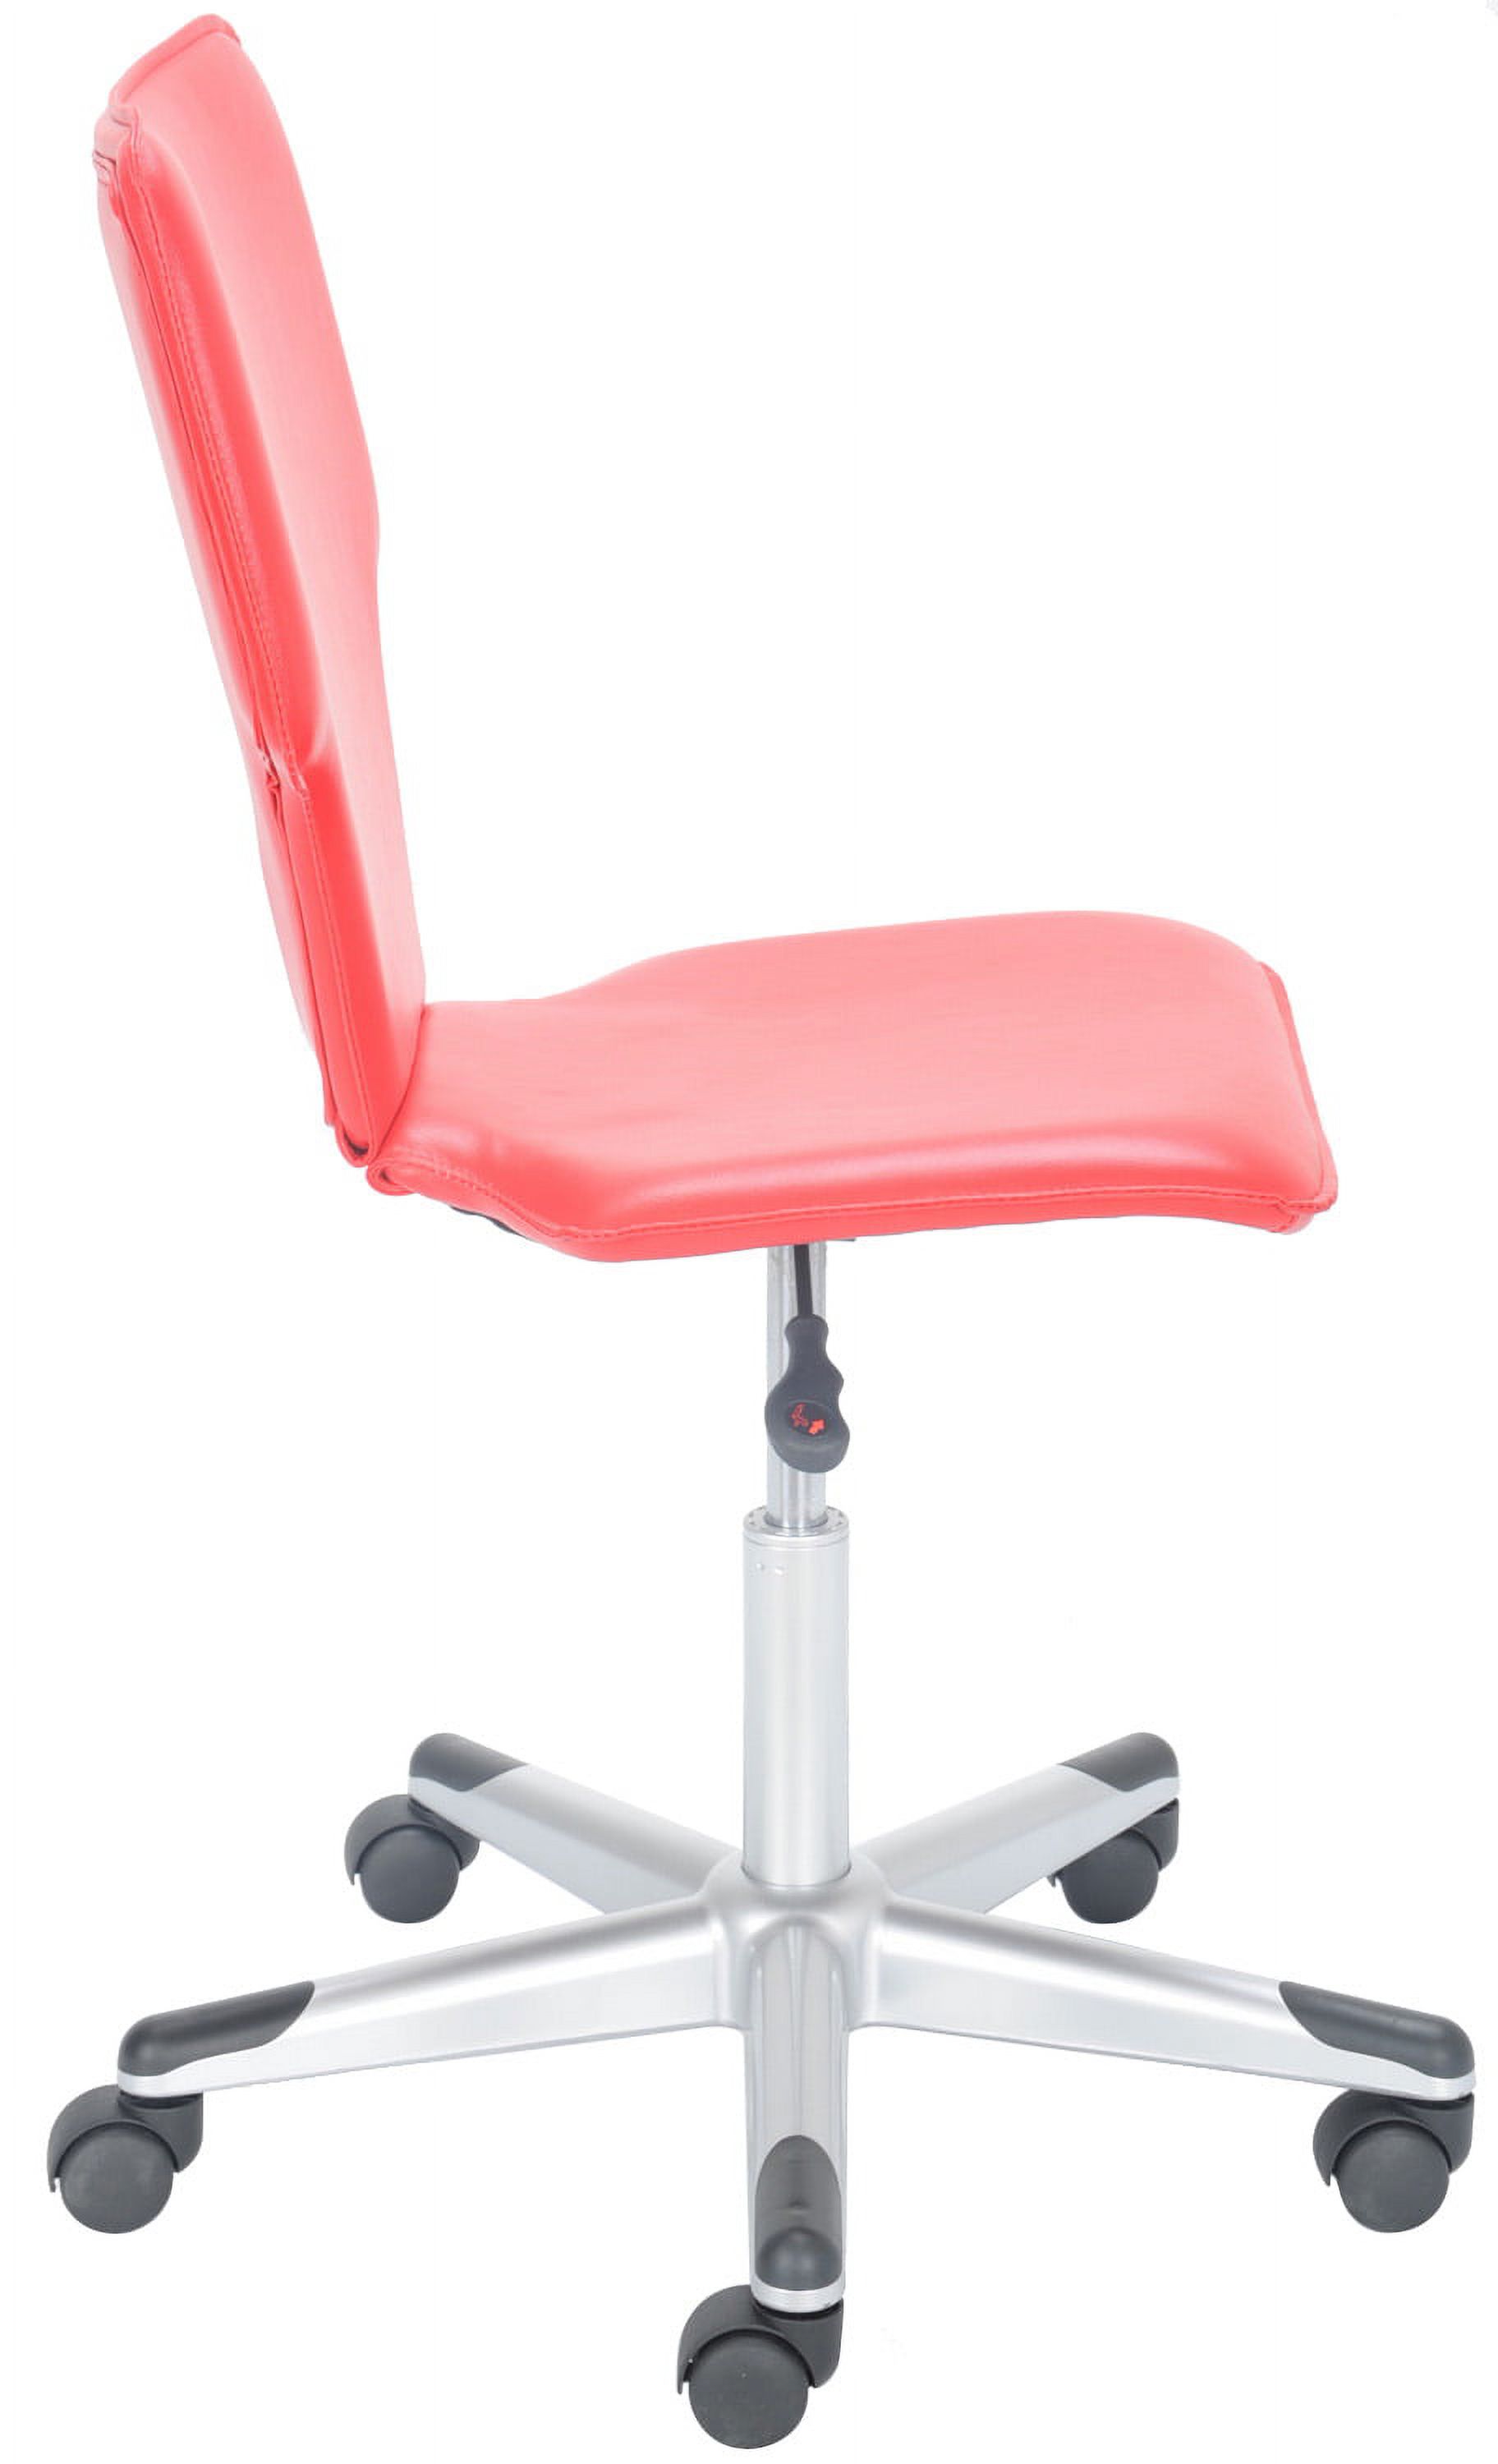 Mainstays Student Office Chair, Multiple Colors - image 4 of 5